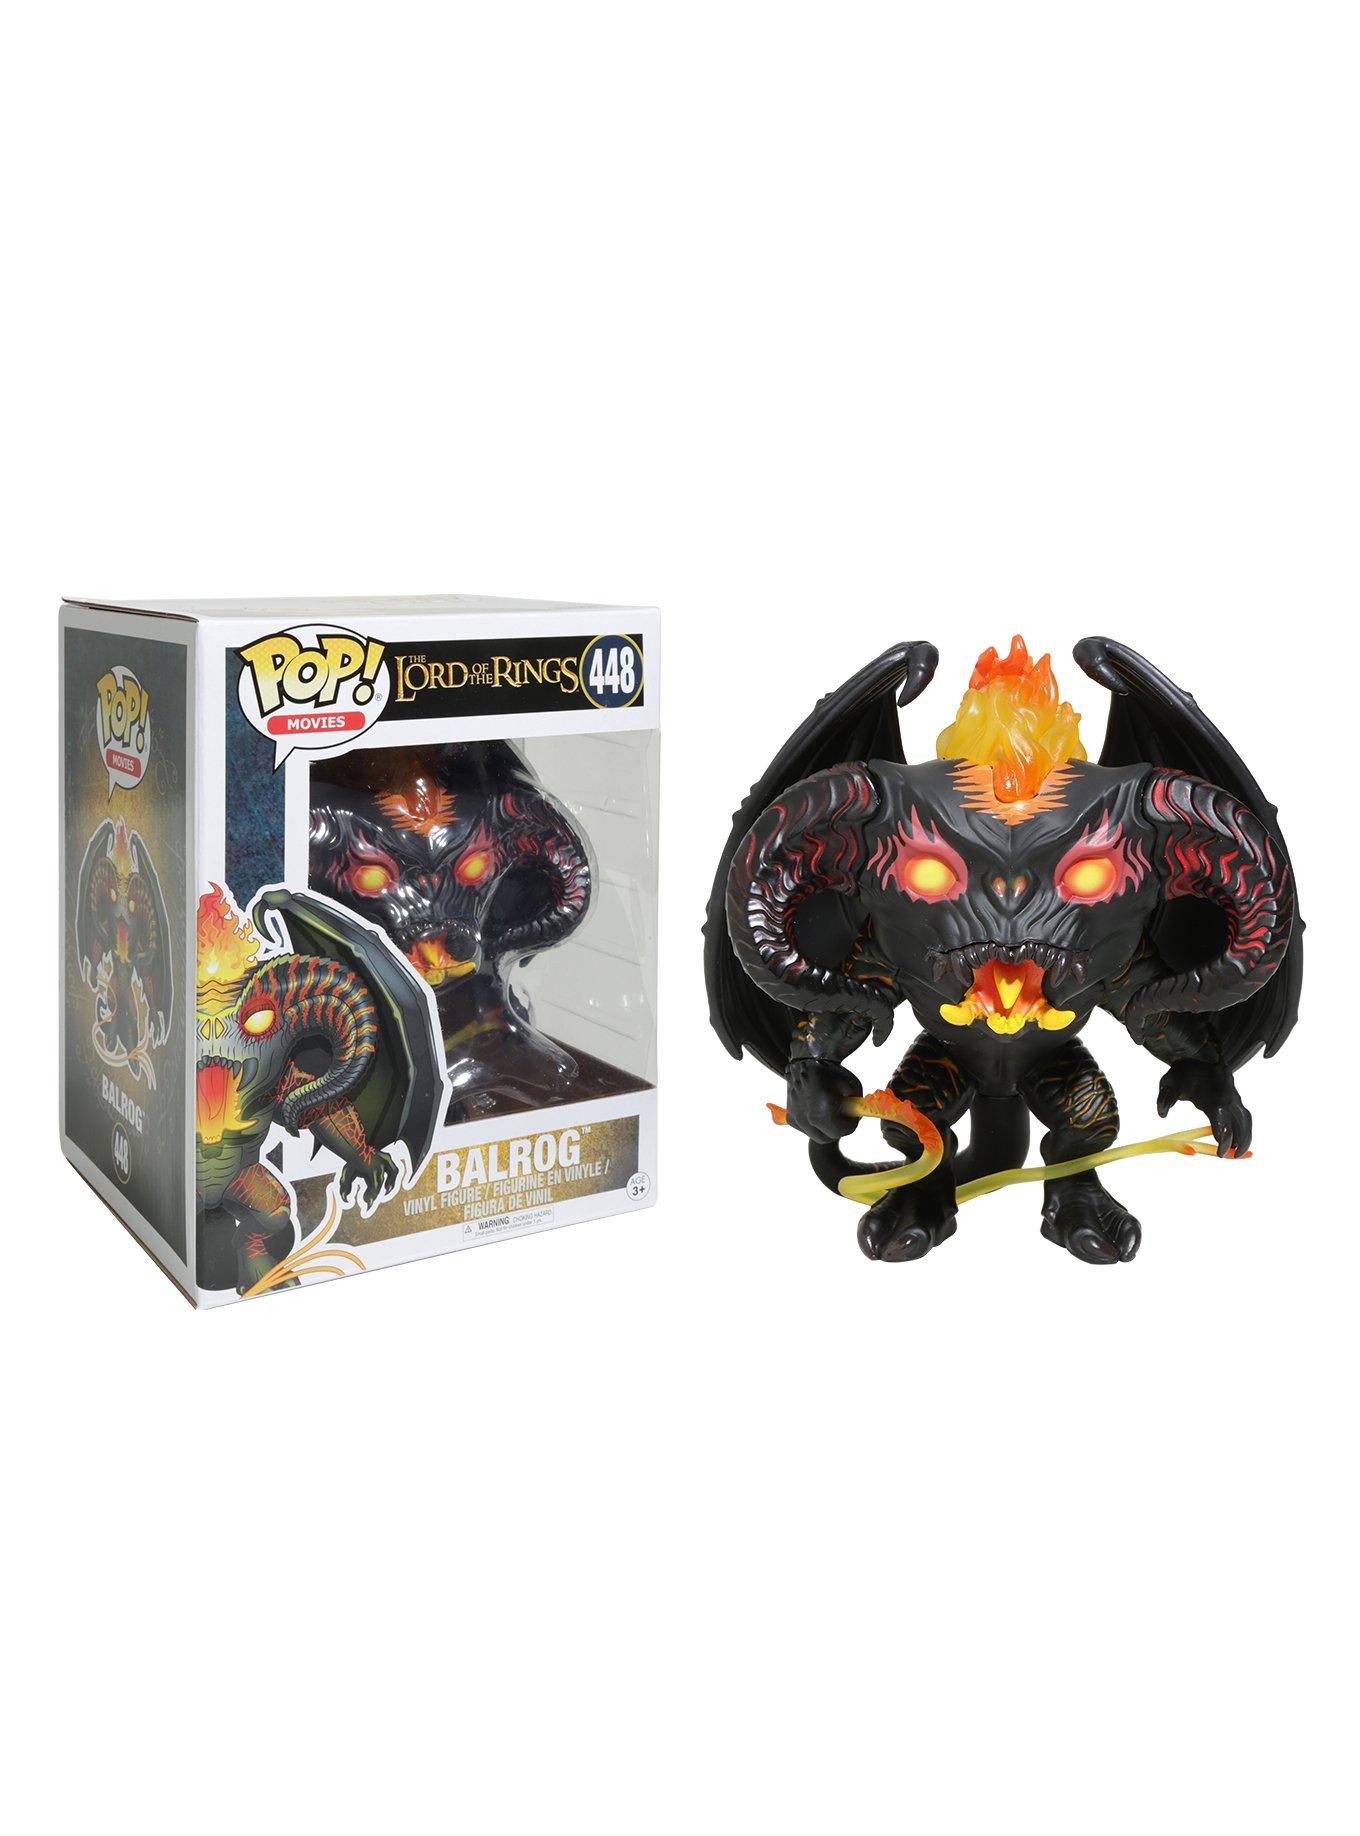 Funko The Lord Of The Rings Pop! Movies Balrog 6" Vinyl Figure, , hi-res